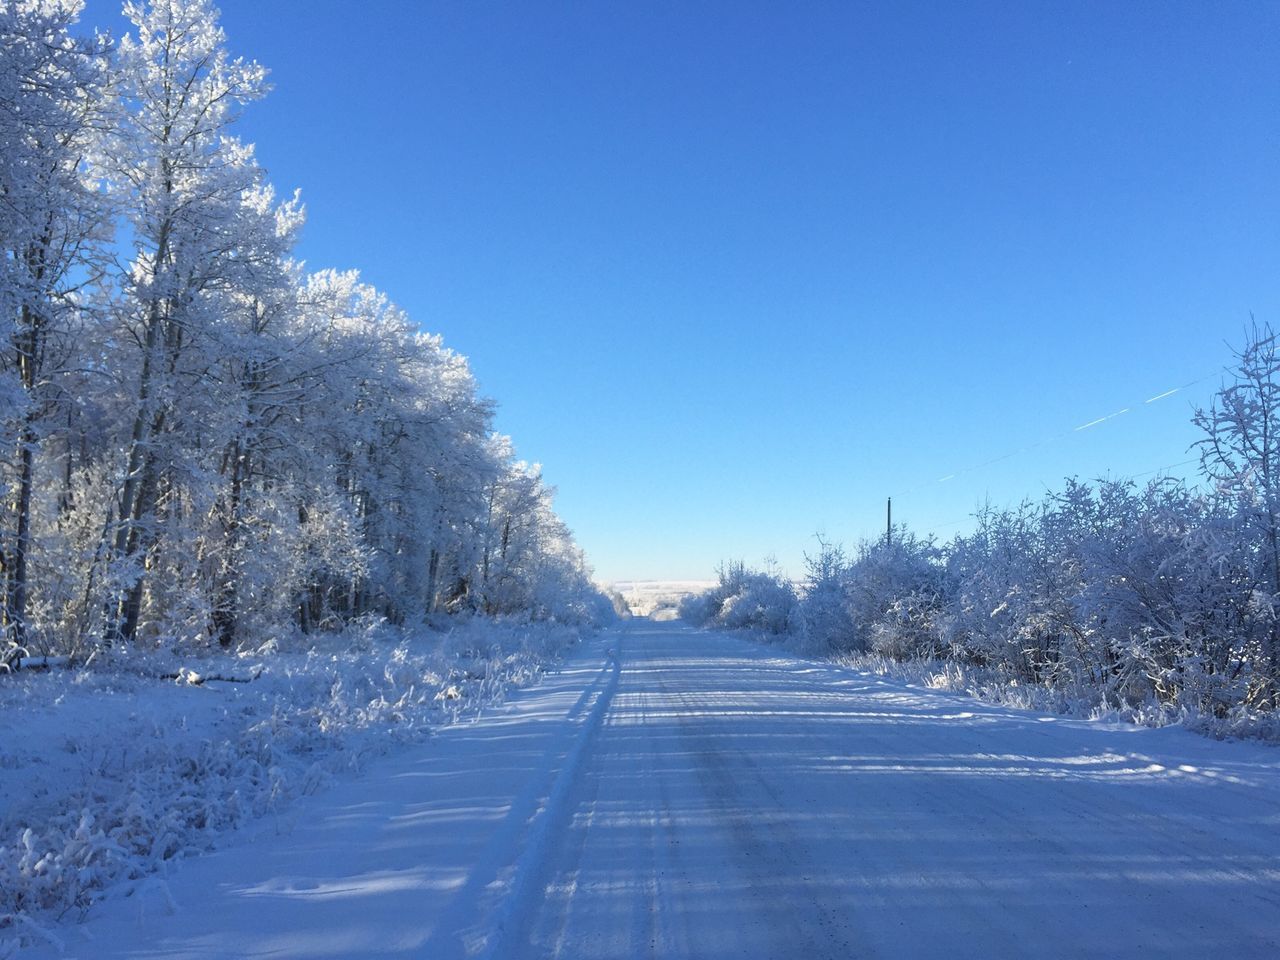 the way forward, clear sky, blue, tree, diminishing perspective, snow, road, transportation, vanishing point, winter, cold temperature, copy space, tranquility, tranquil scene, nature, empty road, day, season, road marking, white color